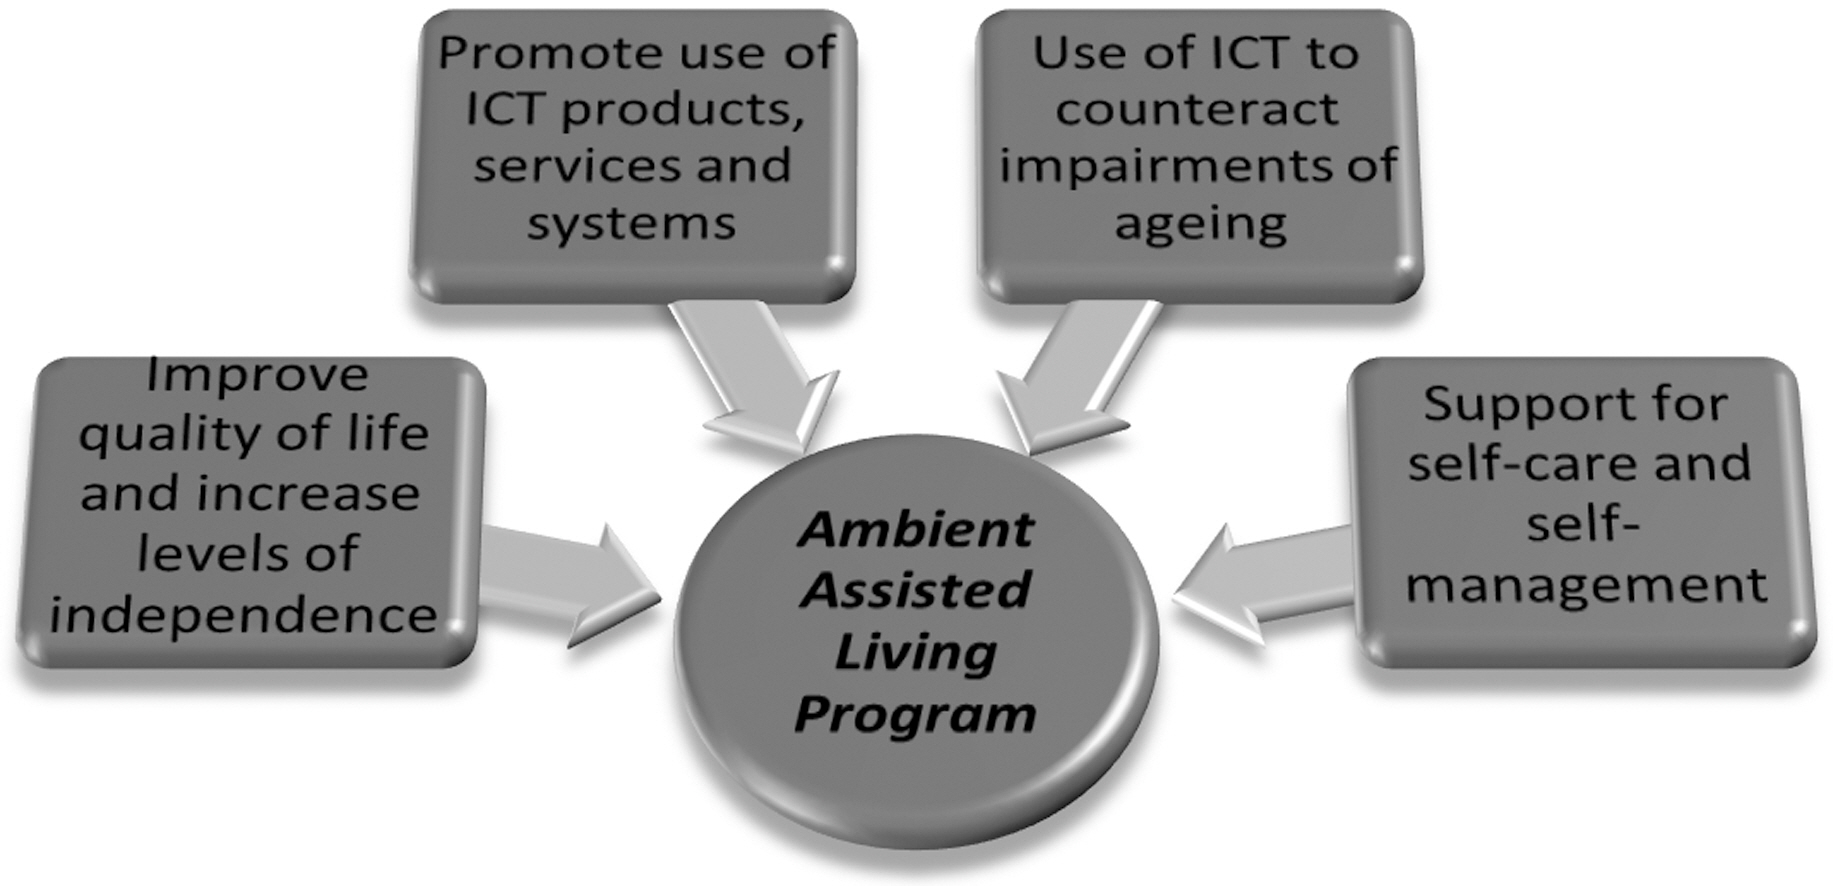 Overview of the main factors contributing to the AmbientAssisted Living Program [3 4]. ICT: Information and CommunicationTechnology.